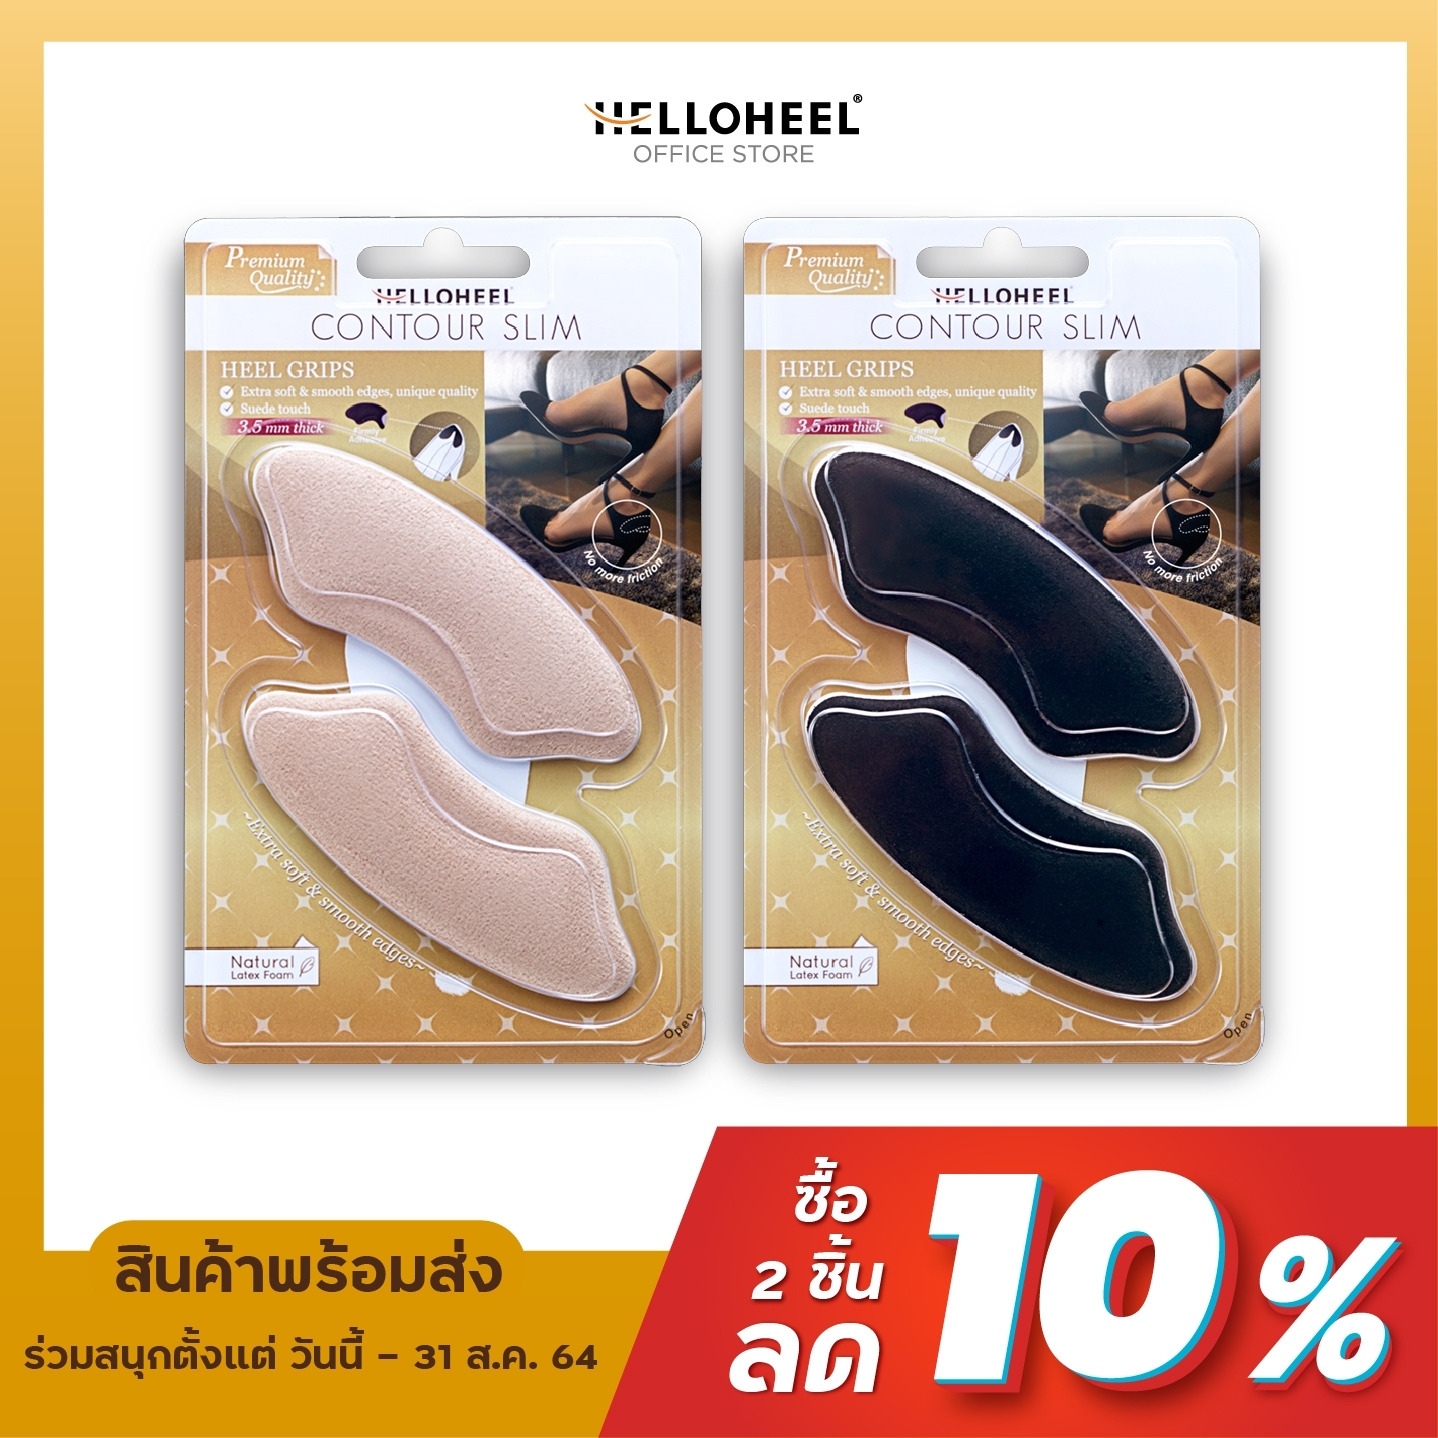 Helloheel แผ่นป้องกันรองเท้ากัด นุ่มพิเศษ Contour Slim Heel Grips Shoe Liners for Blister and Slip Relief | Made with Suede Natural Rubber